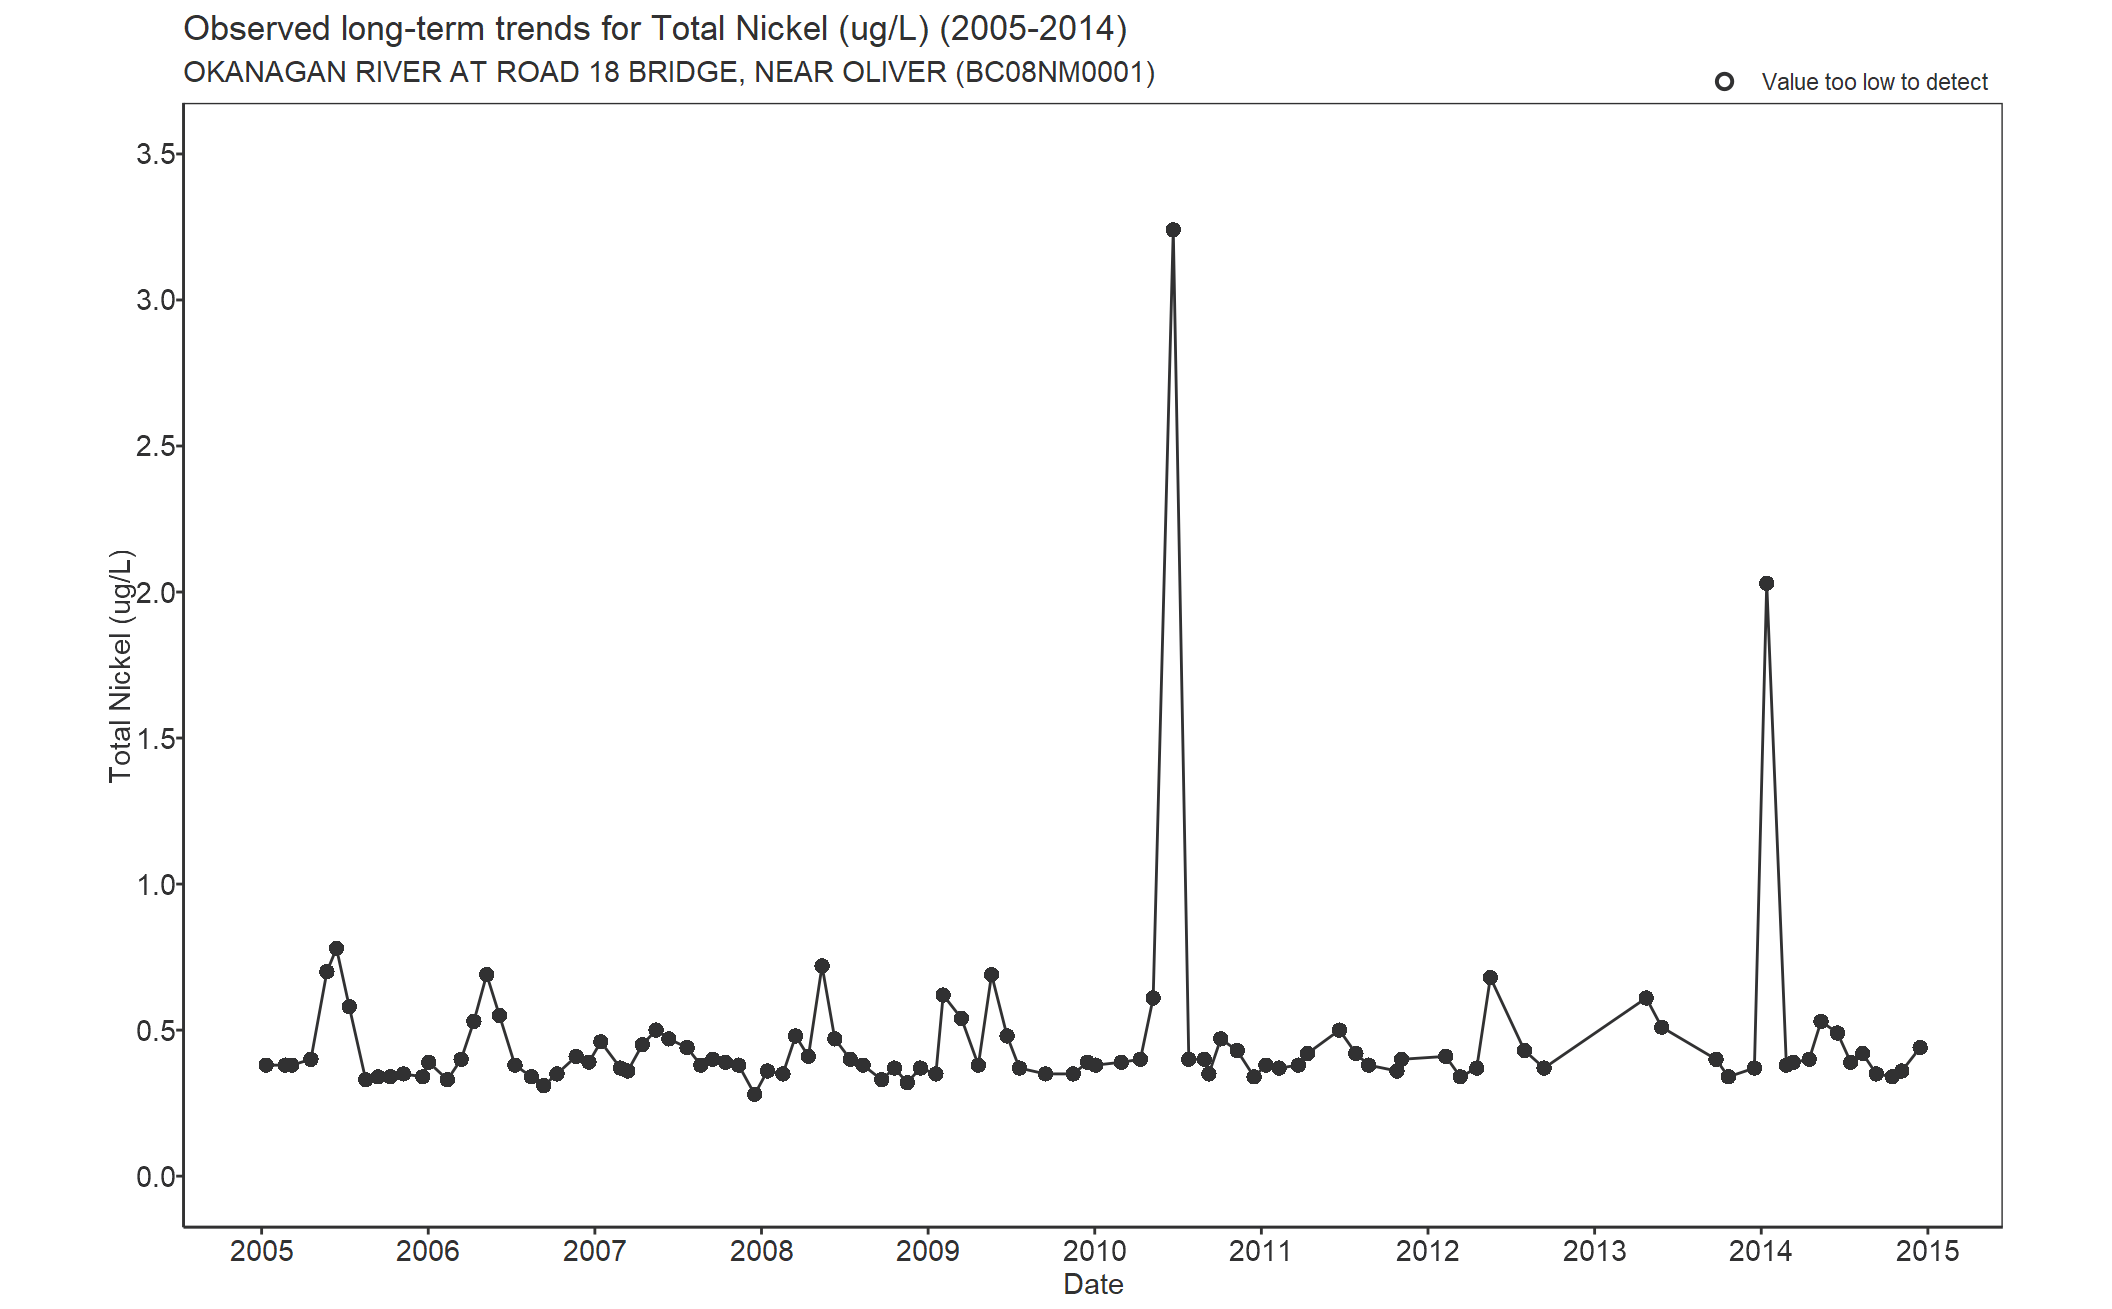 Observed long-term trends for Total Nickel (2005-2014)